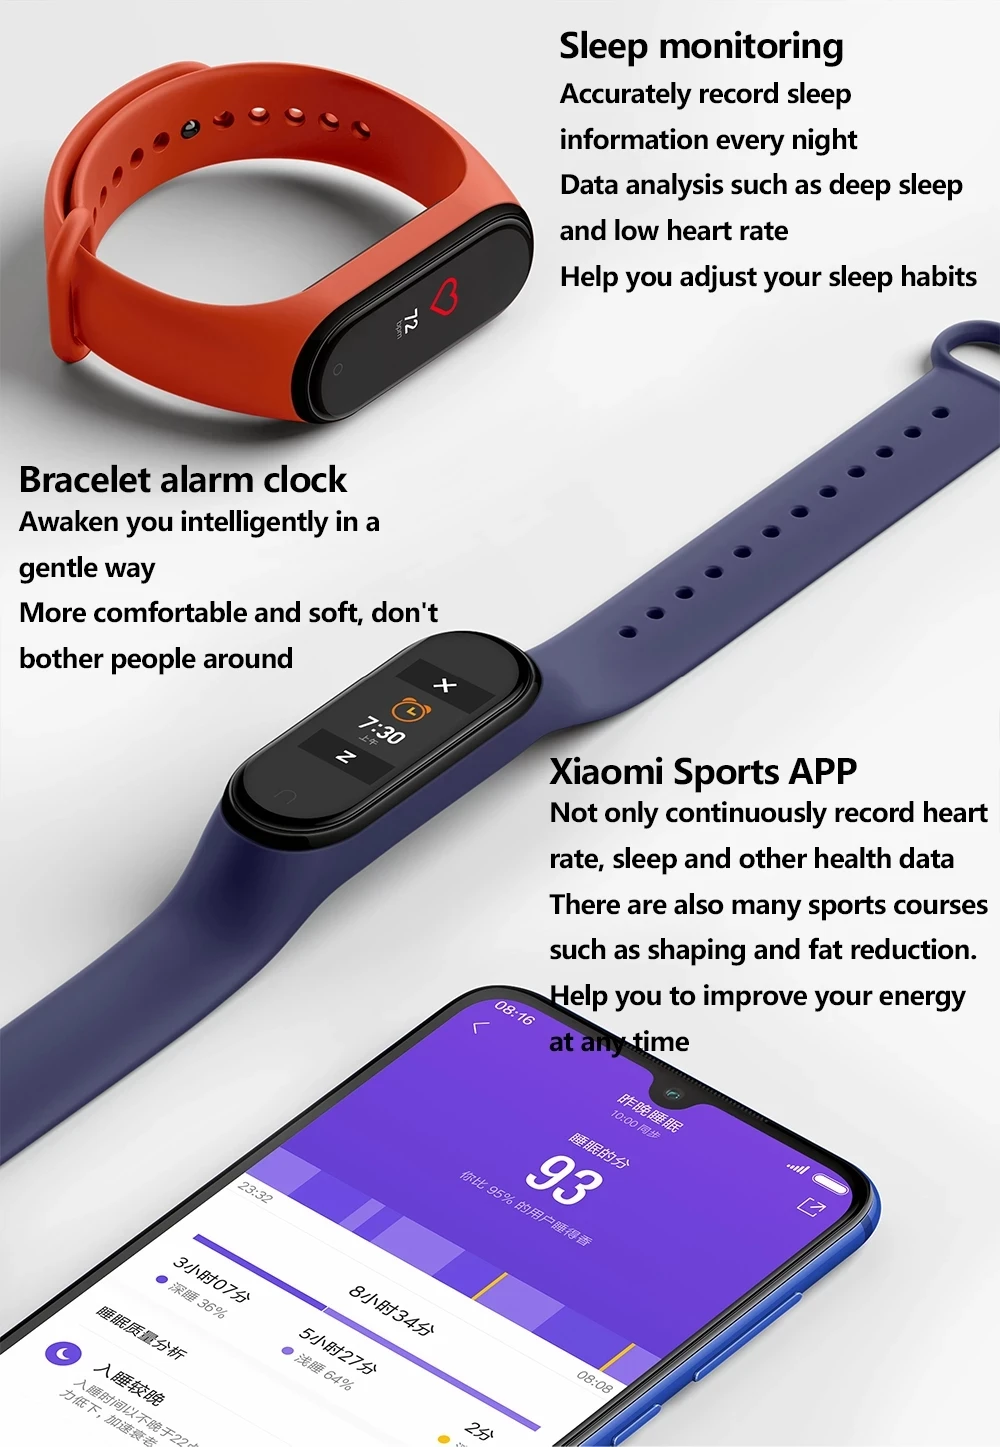 Global Version Xiaomi Mi Band 4 Smart Wristband Miband 4 Bracelet Heart Rate Fitness Color Screen Bluetooth 5.0 Chinese Version